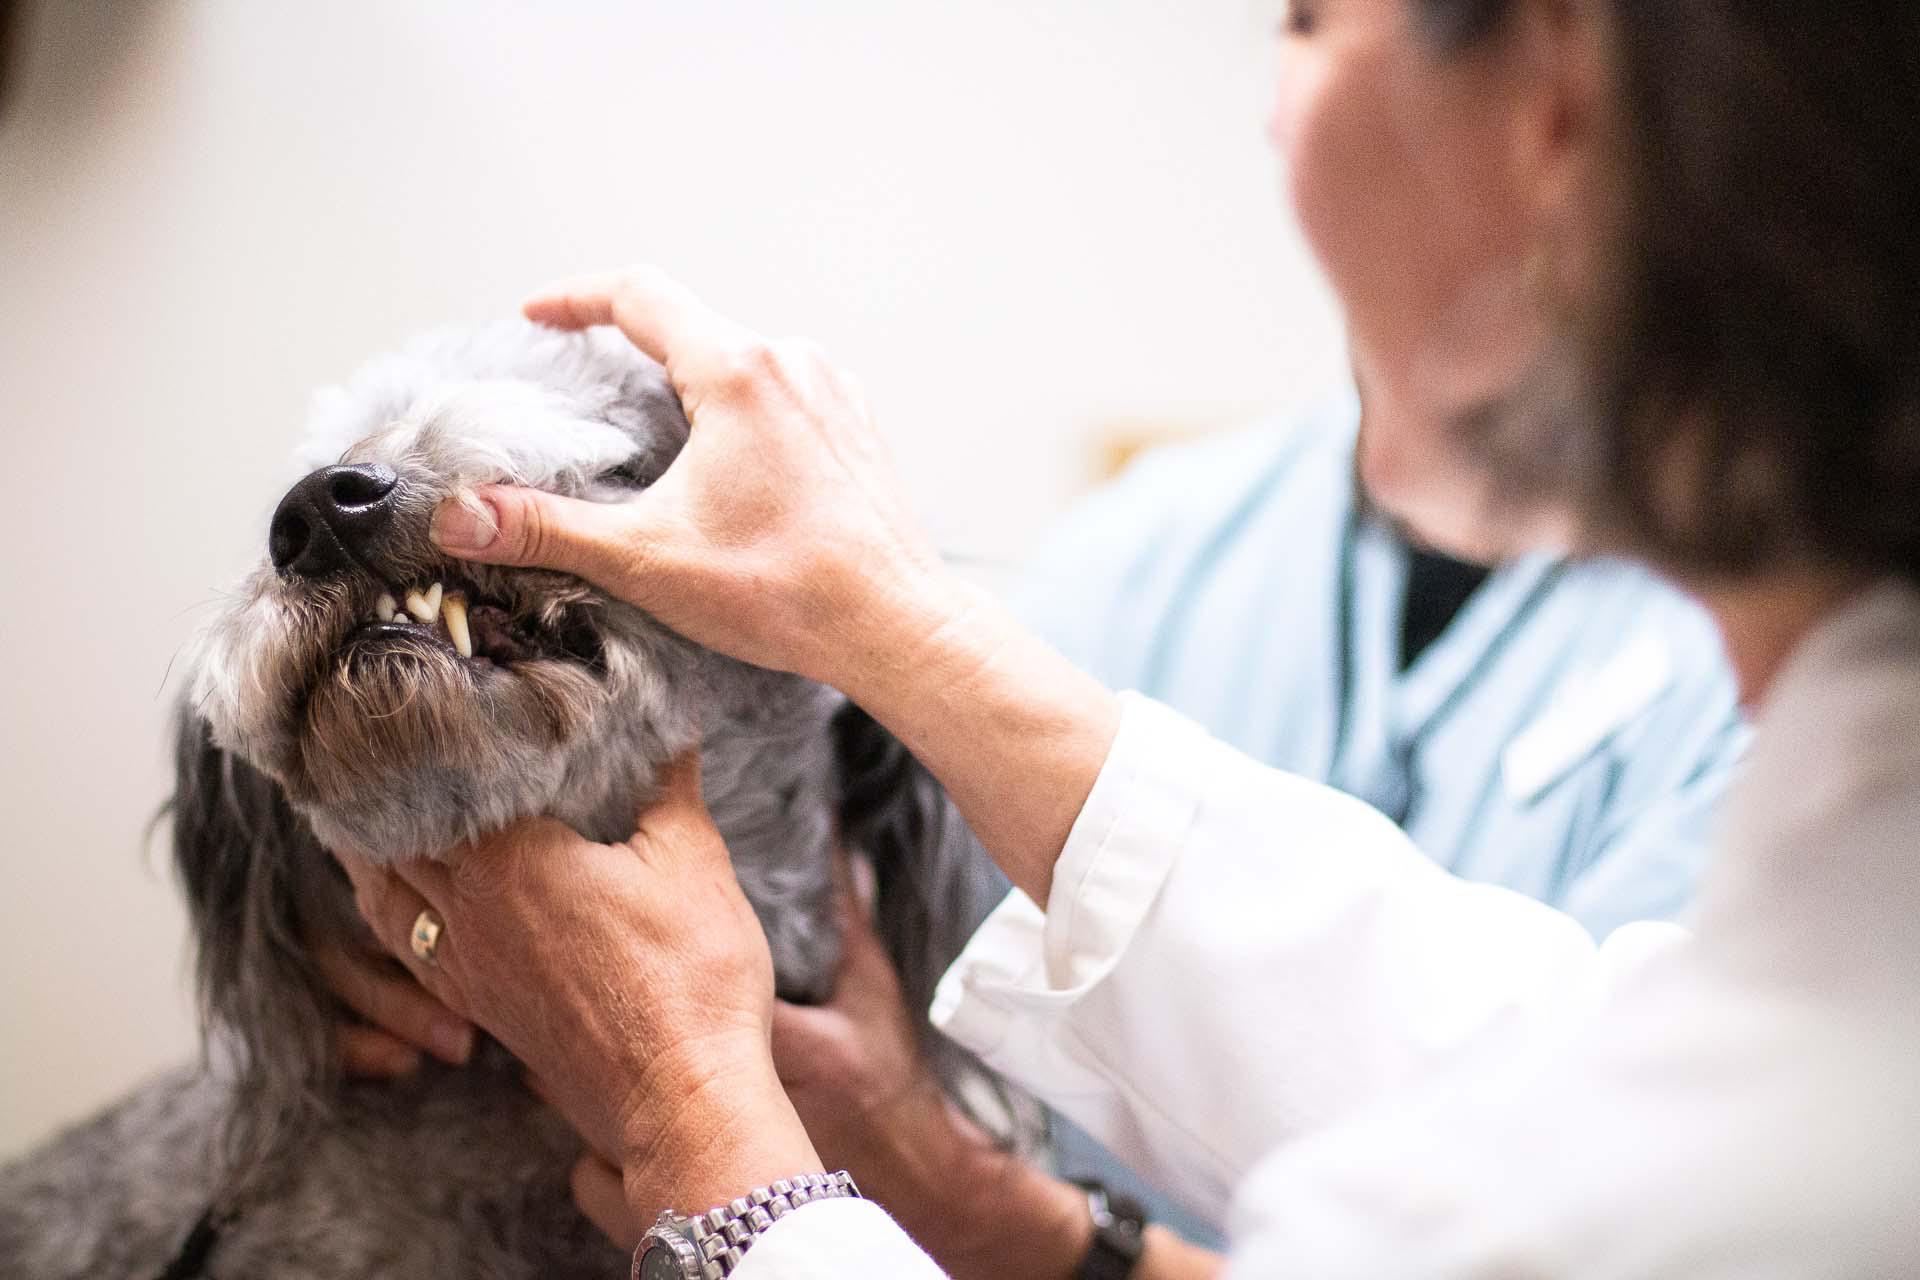 Part of your pet's exam includes and dental exam. We check for dental disease, which is about more than just bad breath, but about your pet’s complete health! Oral bacteria puts pets at risk for painful teeth and gums, and more serious issues like organ damage.